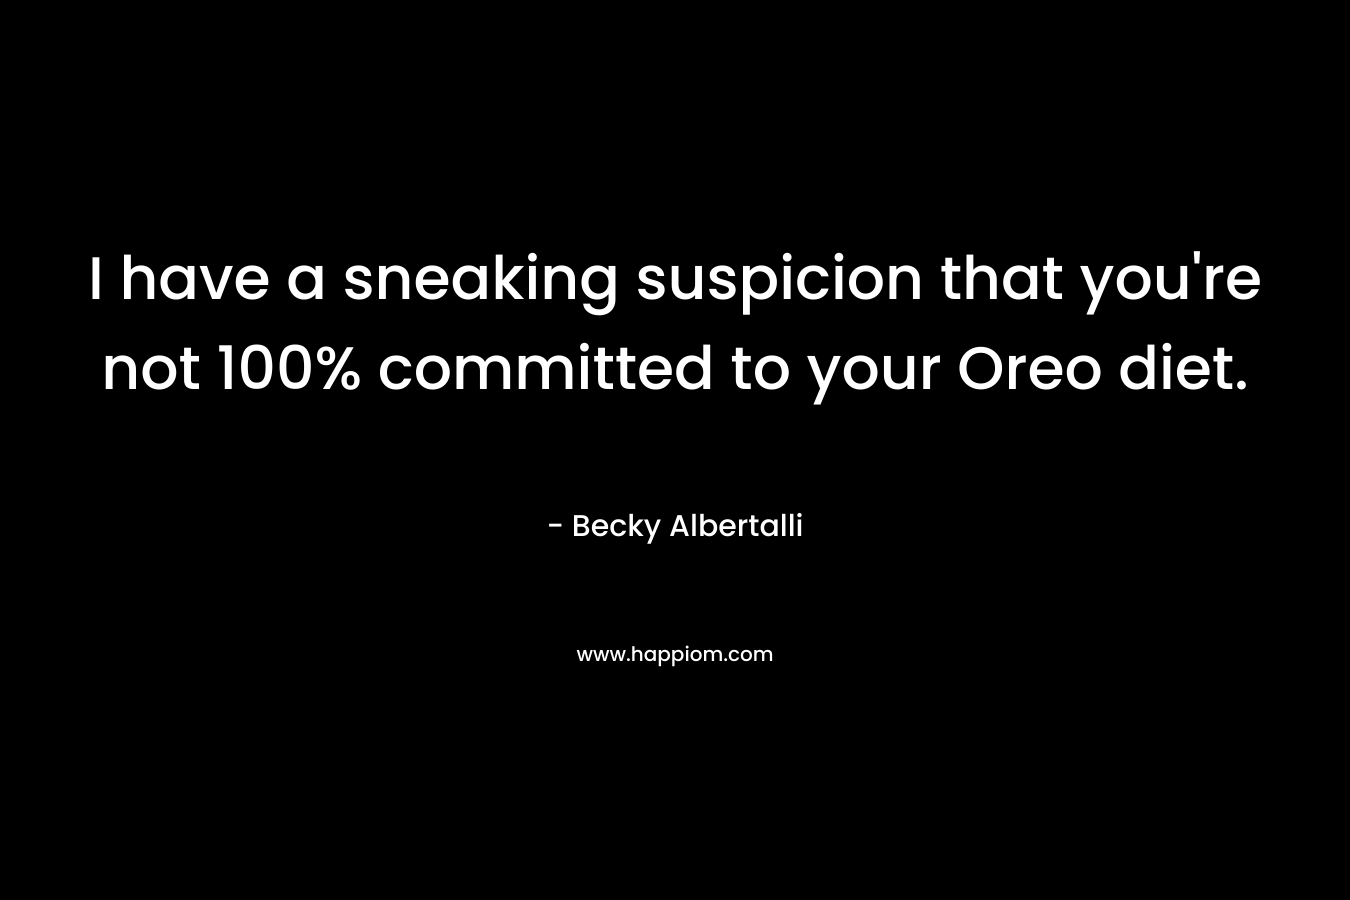 I have a sneaking suspicion that you’re not 100% committed to your Oreo diet. – Becky Albertalli